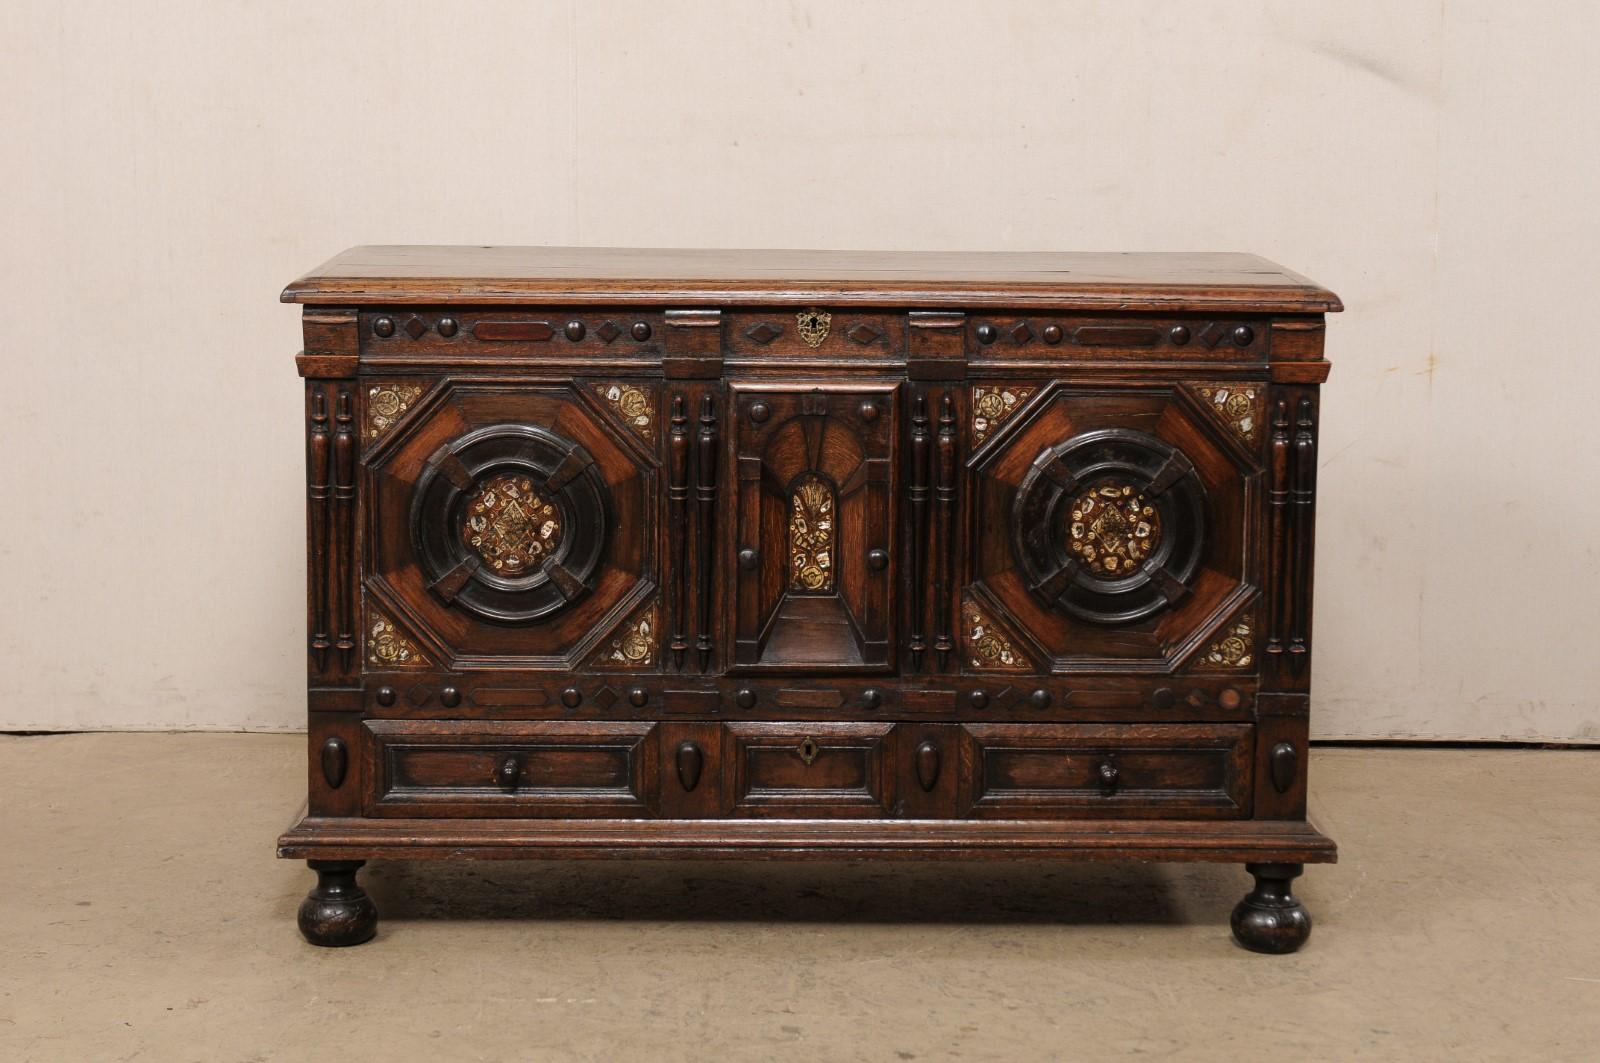 An English carved oak trunk with bottom drawer, circa 1820-50's. This antique trunk from England features an exquisitely hand-carved front facade with geometric shaped panels, and adorn with column, diamond, oval and round medallion accents, with an